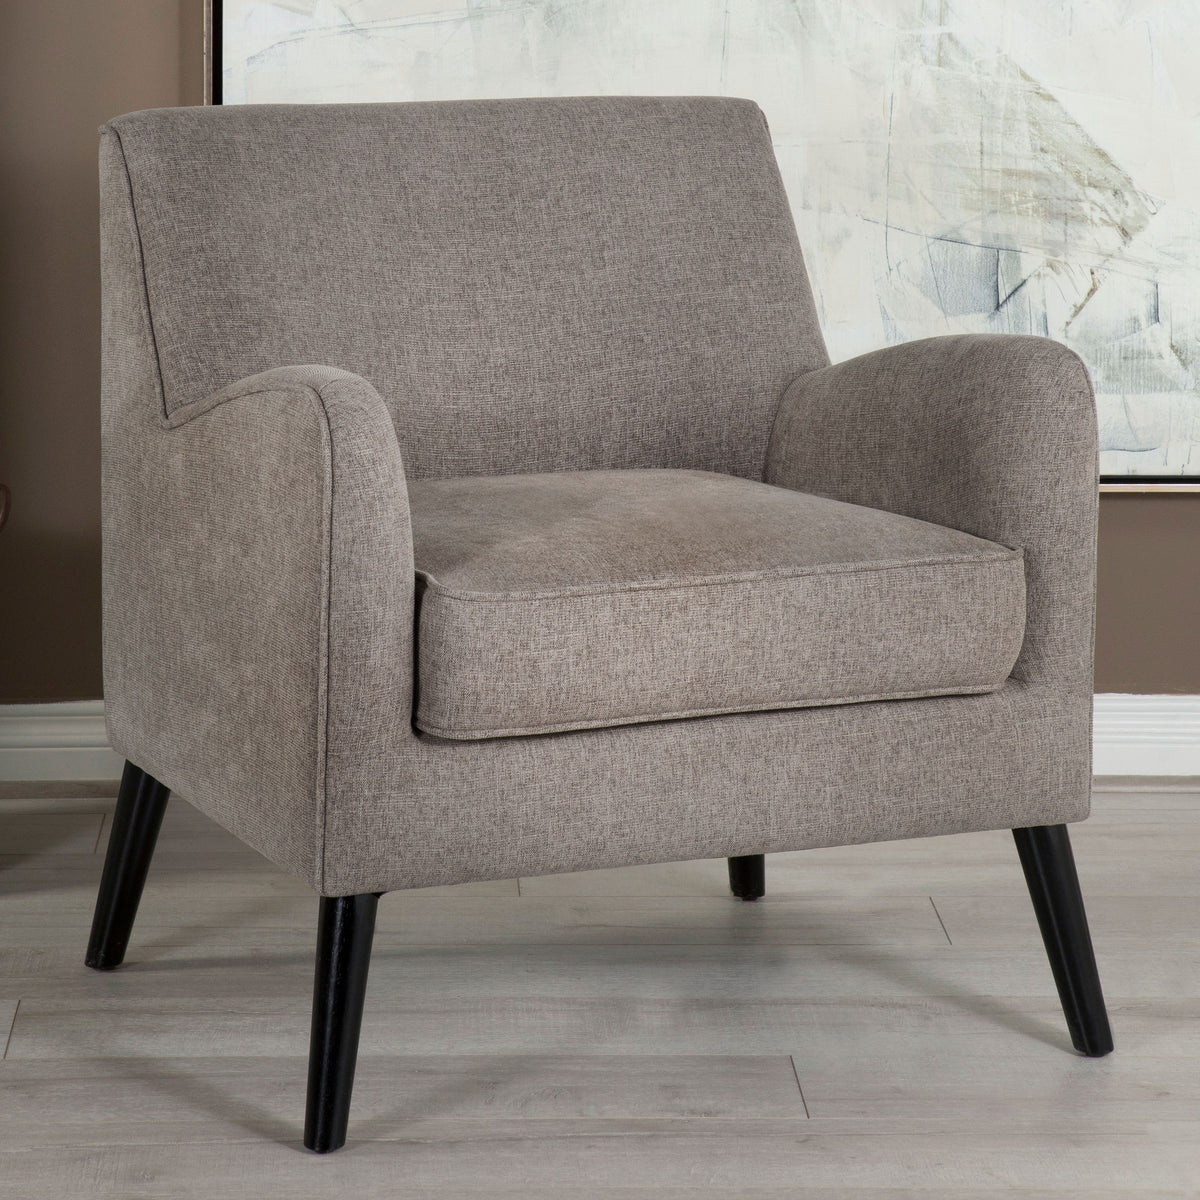 Charlie Upholstered Accent Chair with Reversible Seat Cushion  Las Vegas Furniture Stores